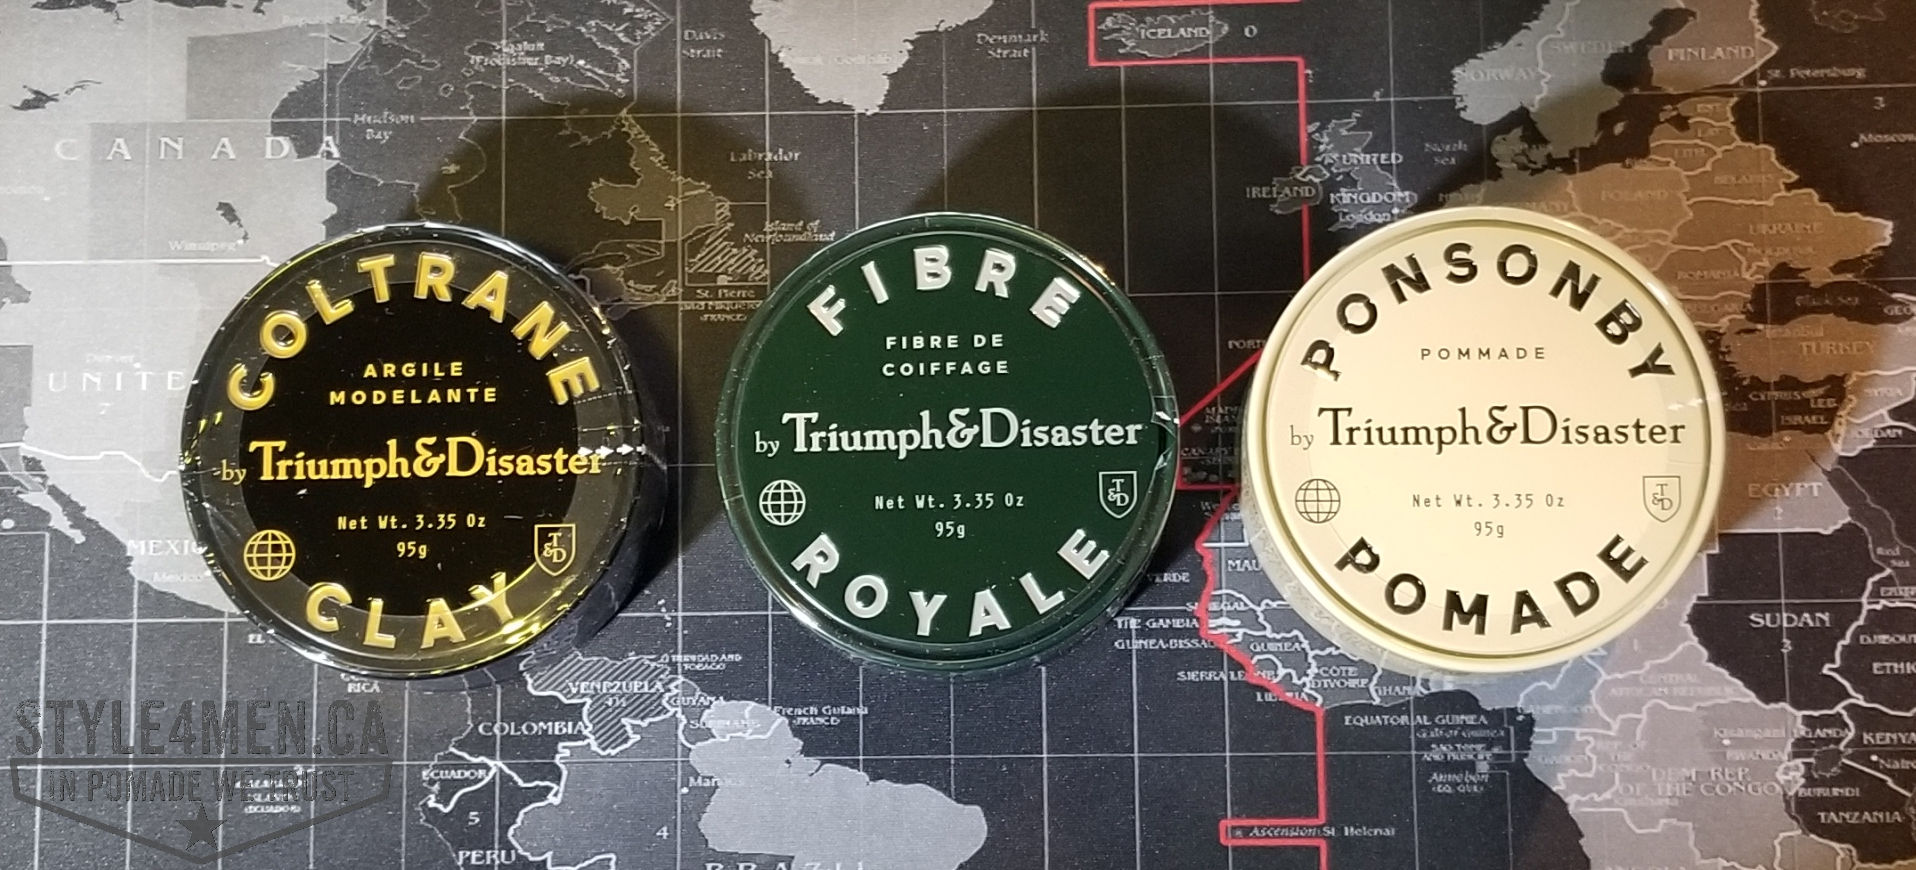 Triumph and Disaster – Beautiful vintage-chic packaging